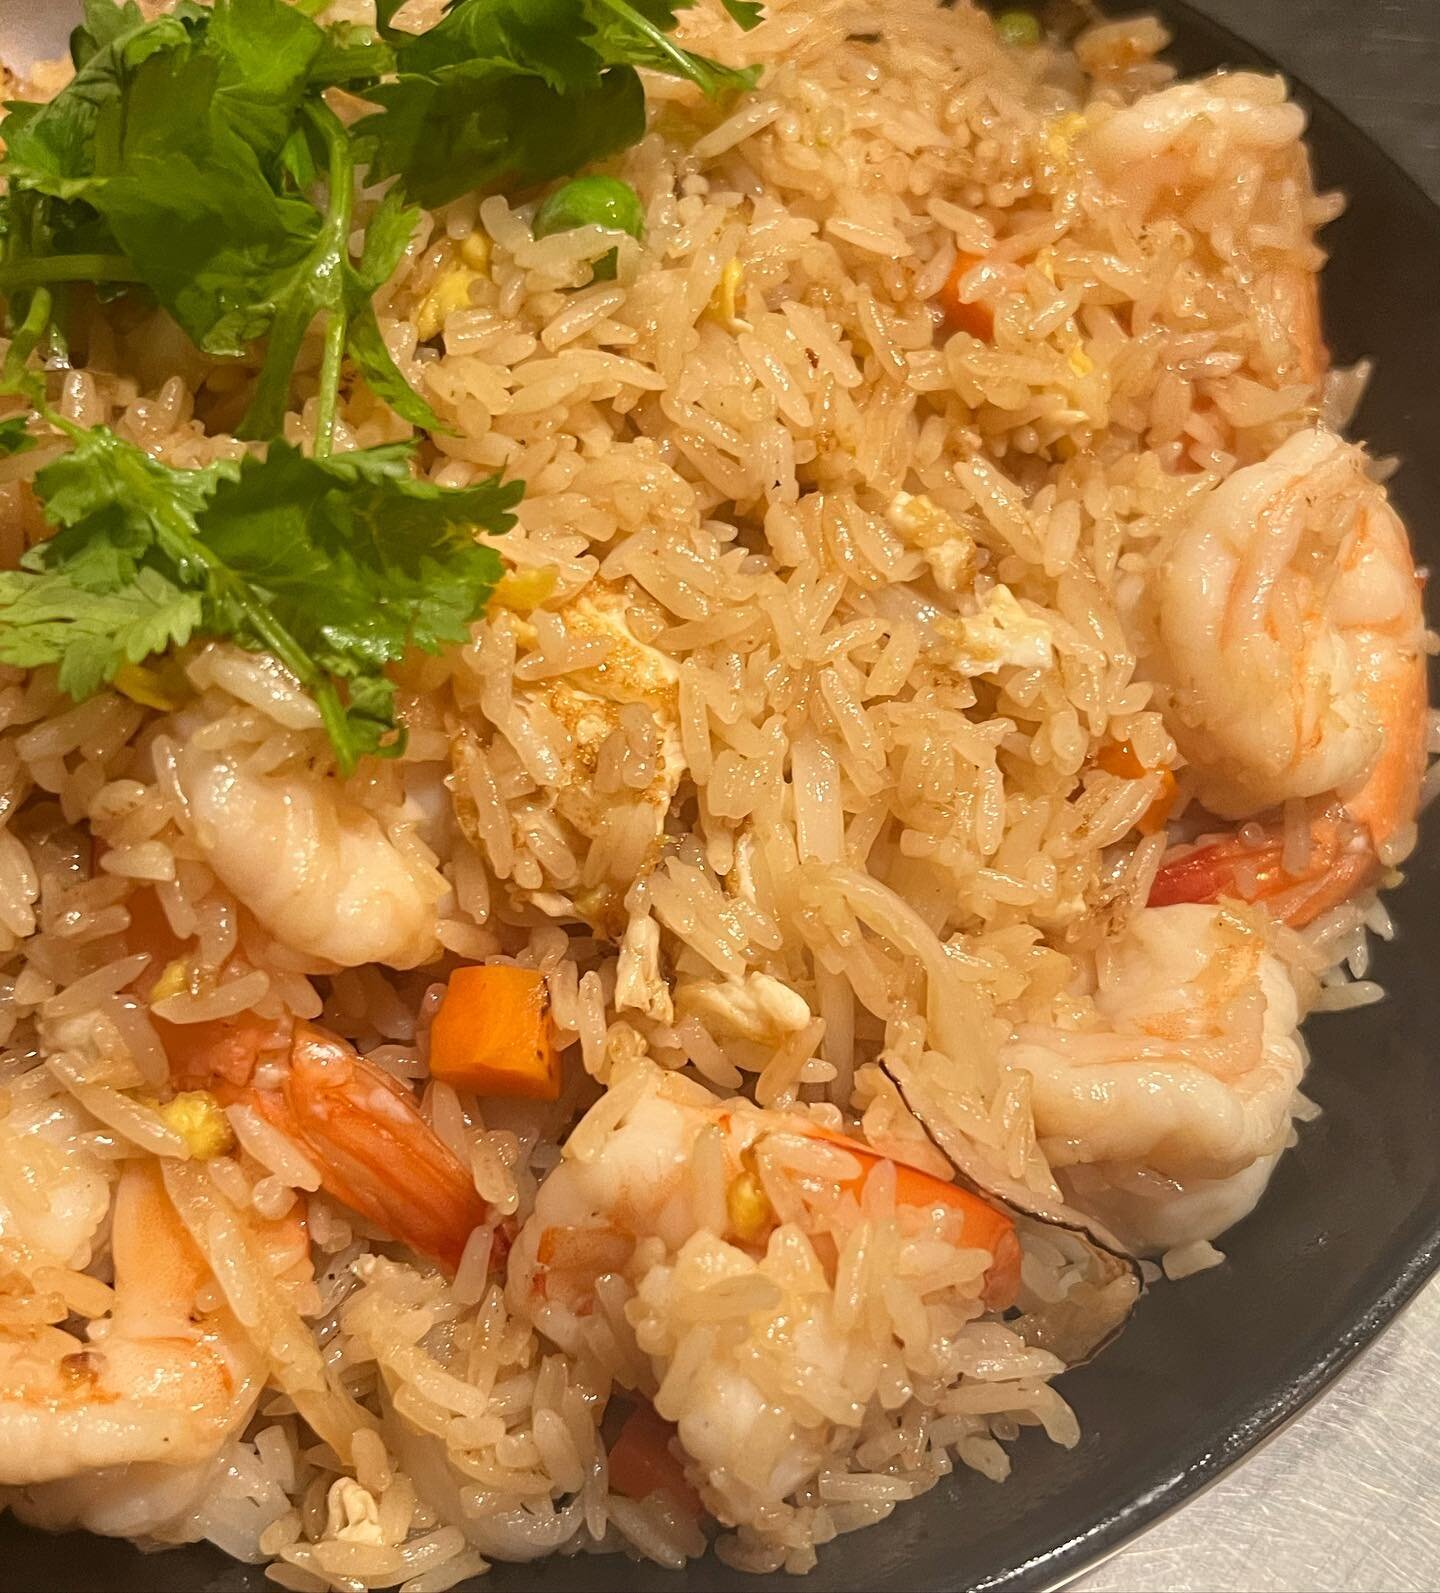 Shrimp Fried Rice for the win 🍤

Now open for dine-in, take-out, and delivery! ✨

📞 661-513-0330, 661-513-0350 
🖥️ Order online at thaichefsvalencia.com 

Thai Chefs Restaurant 
📍28014 Seco Canyon Rd, Santa Clarita CA 91390

#thaicuisine #thaifoo